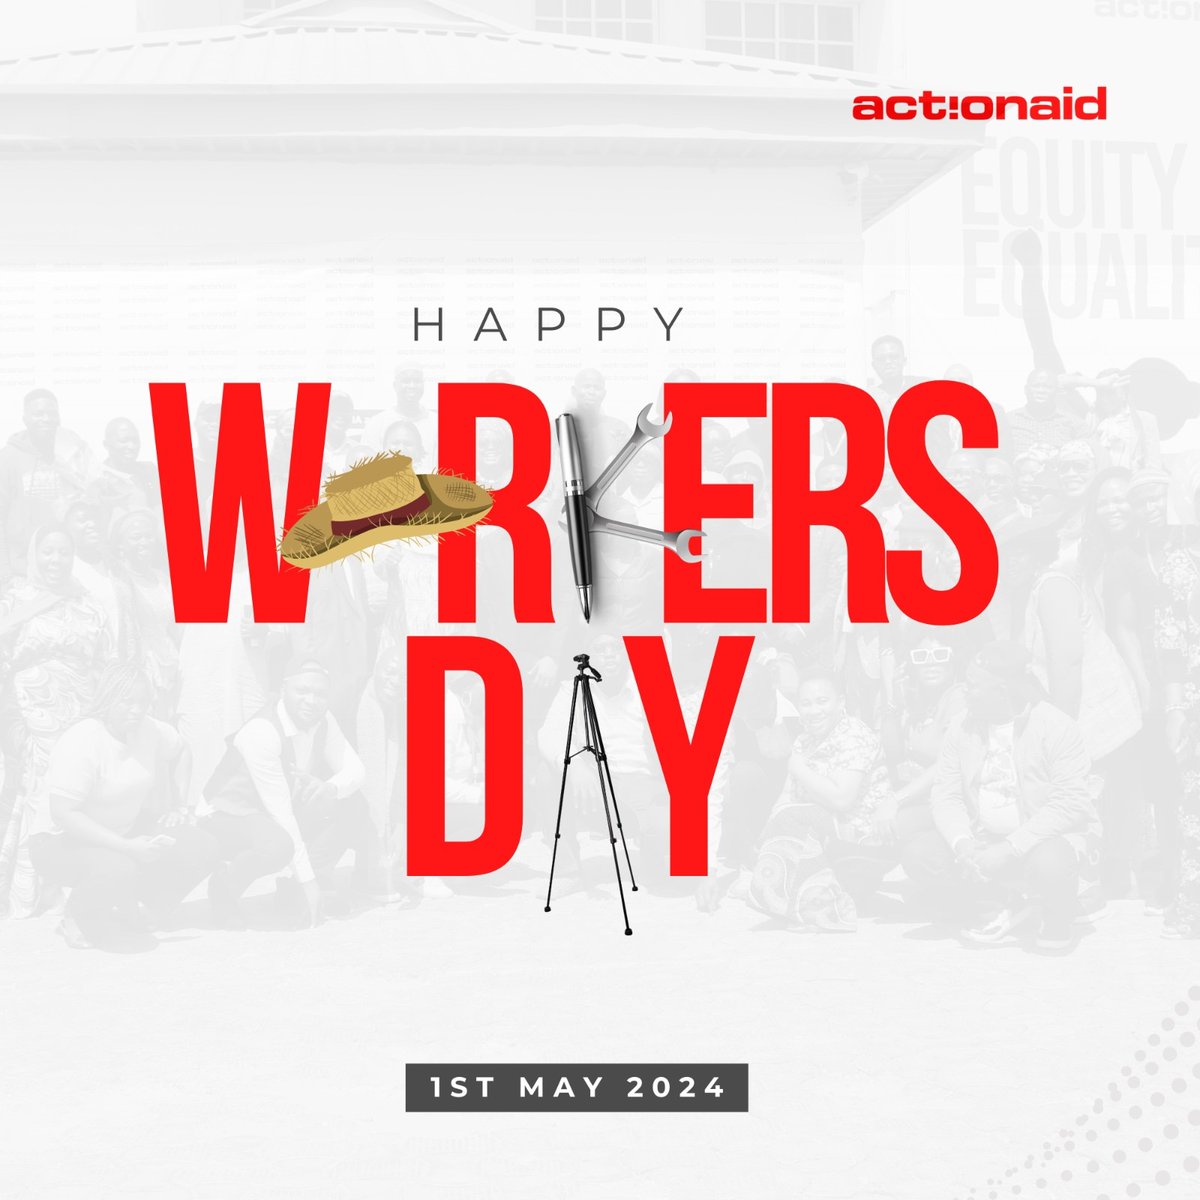 Happy Workers' Day! Today, we celebrate the resilience and dedication of Nigerians striving for justice, equality, and empowerment. We stand in solidarity with you all. A luta continua, vitória é certa! #workersday